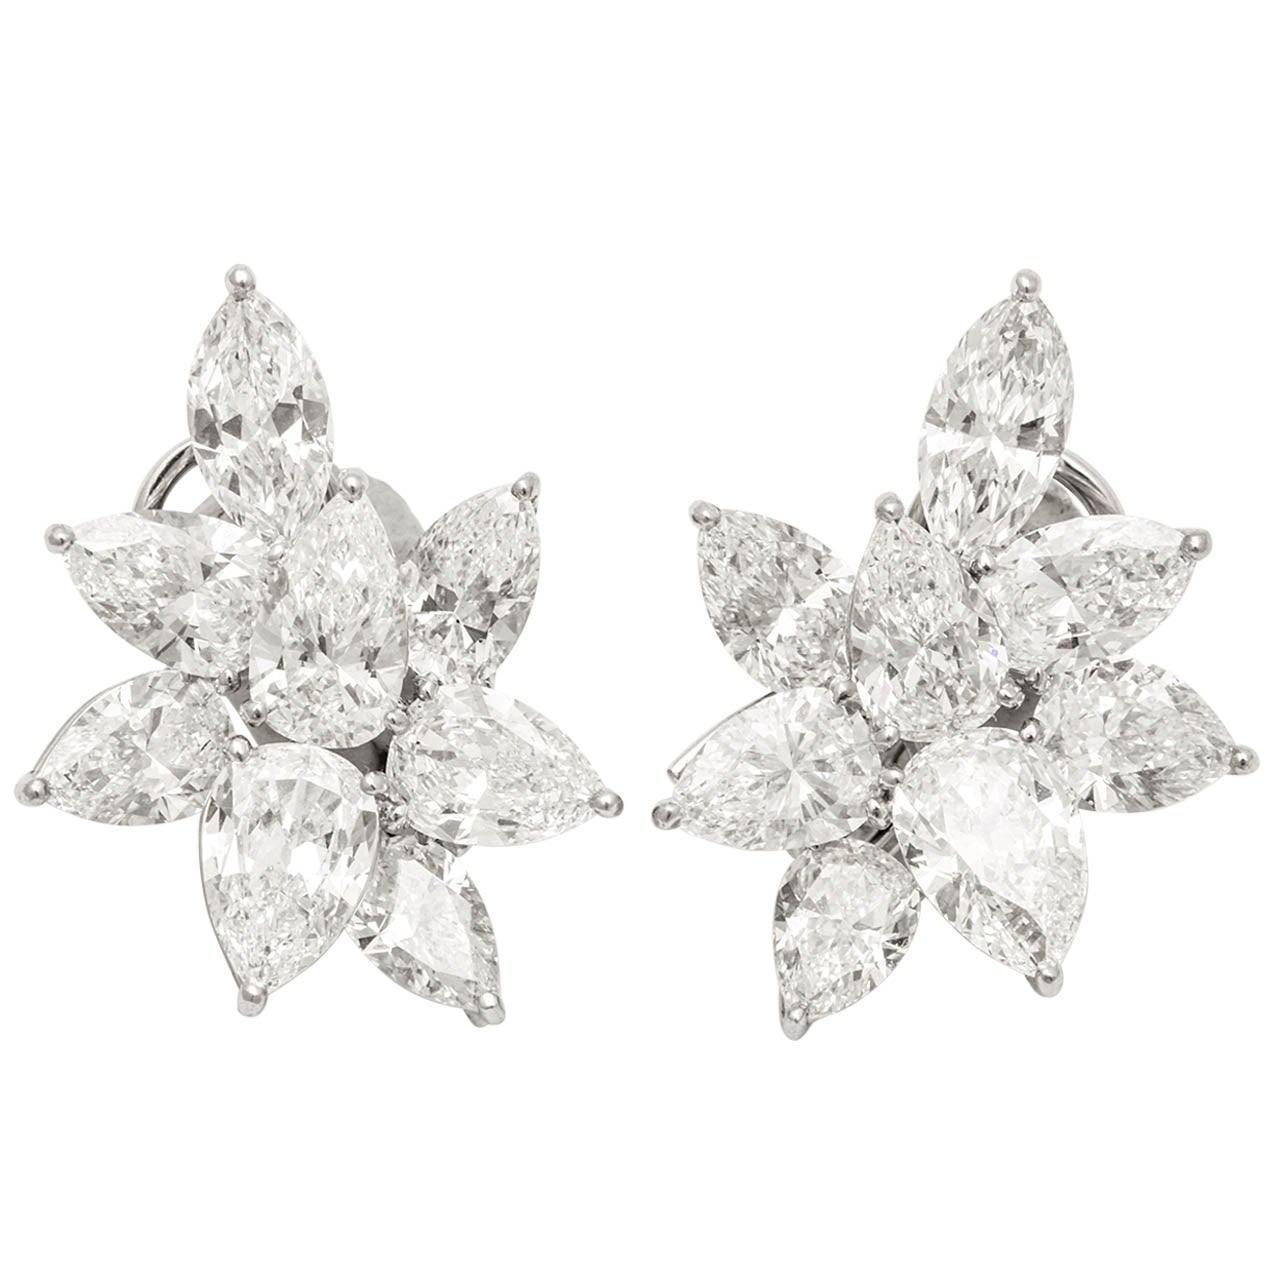 Magnificent Diamond Earrings For Sale